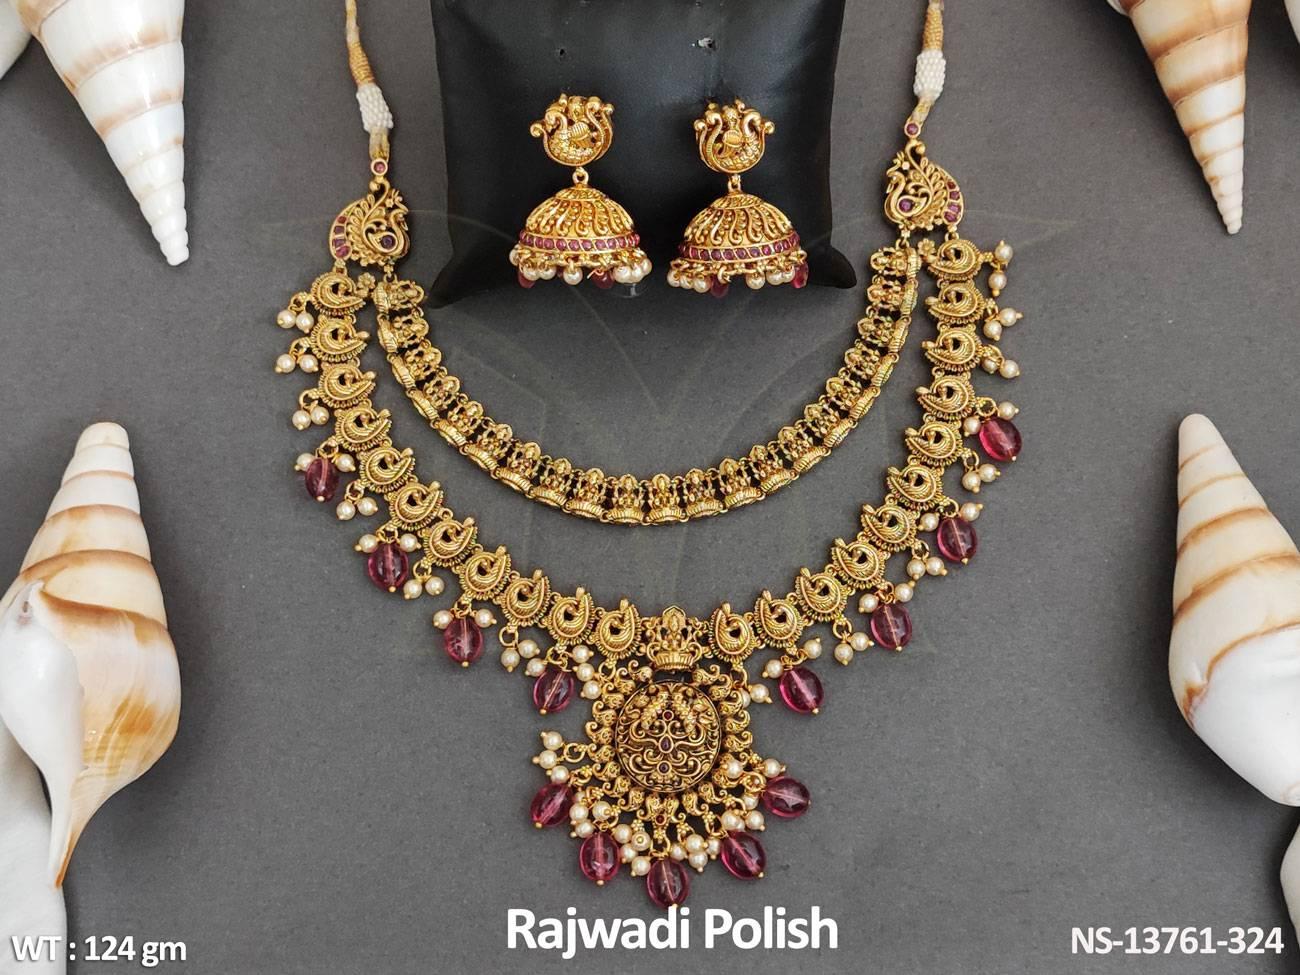 The unique pattern of the set is sure to add the perfect touch of elegance to your look.